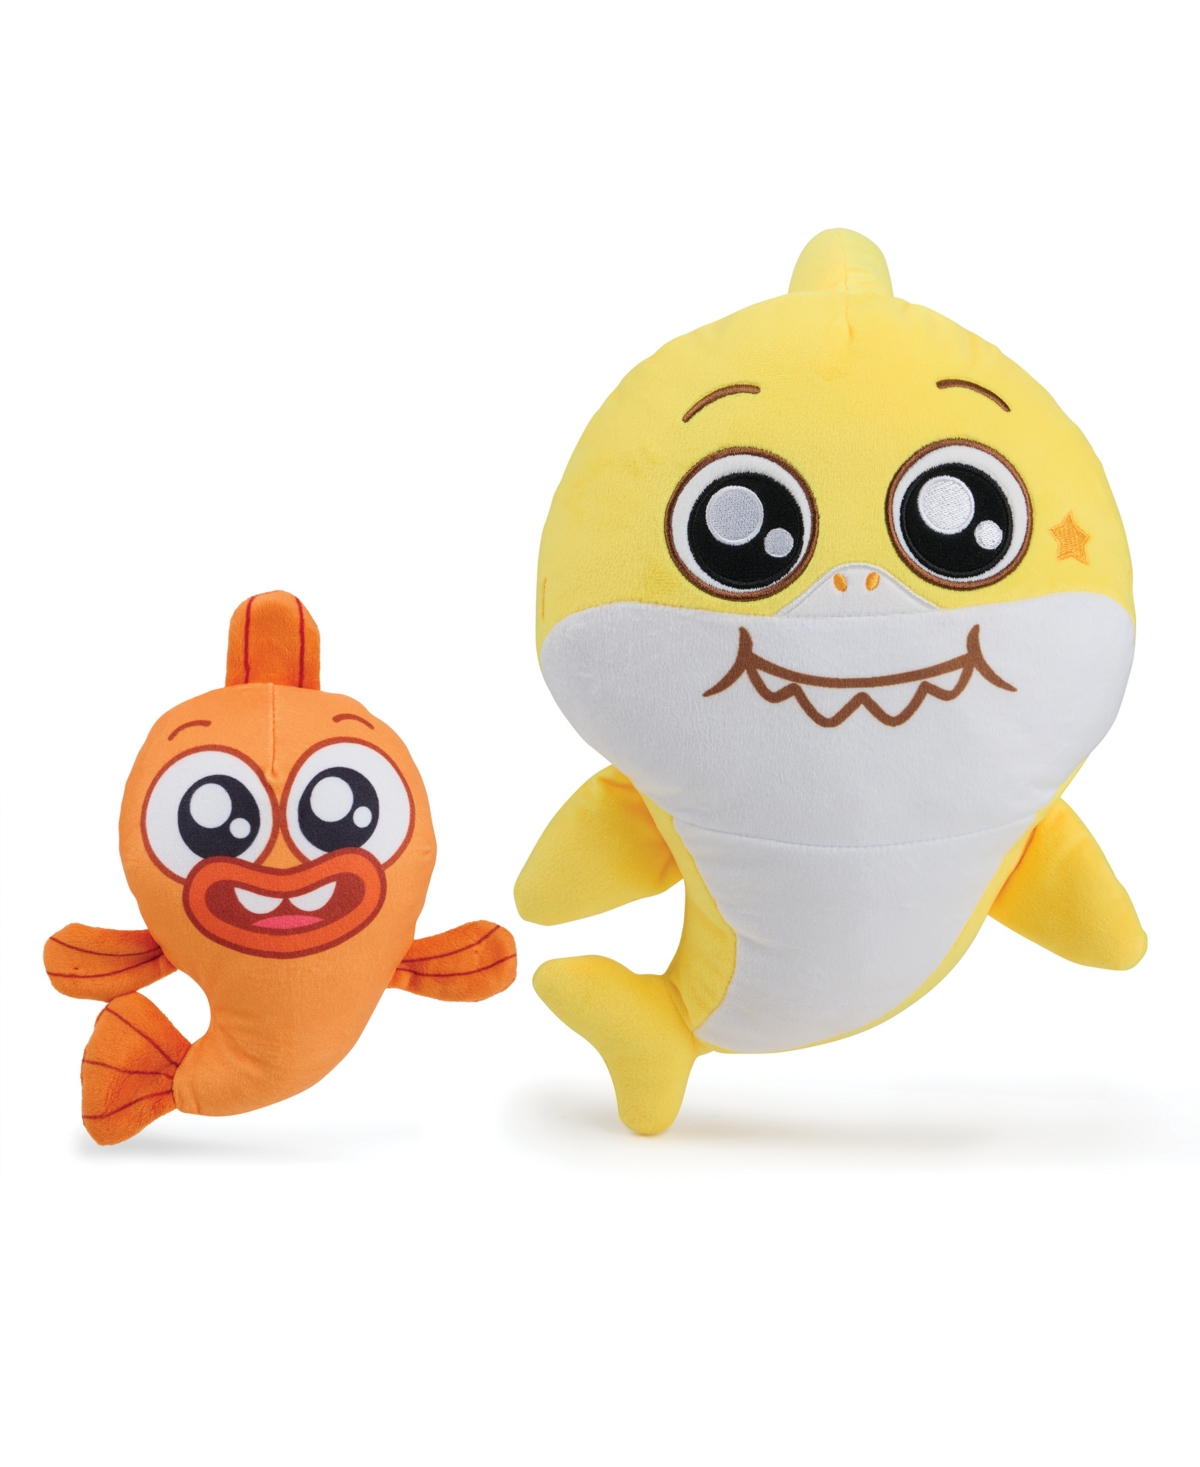 Baby Shark Kids' Basic Plush 12" With Sound And William 7" Basic Plush No Sound In Multicolor